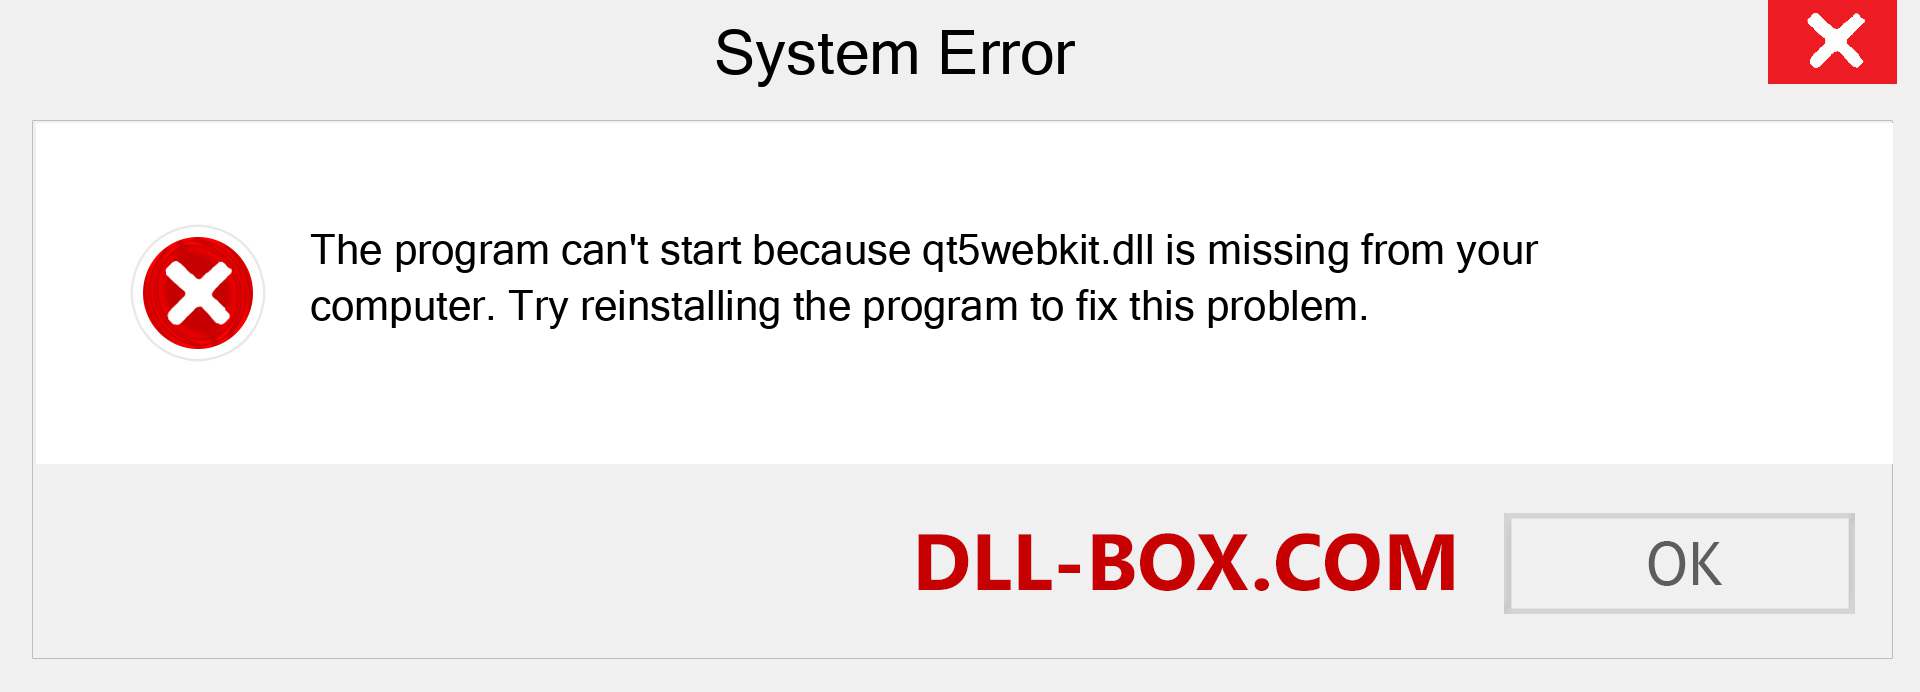  qt5webkit.dll file is missing?. Download for Windows 7, 8, 10 - Fix  qt5webkit dll Missing Error on Windows, photos, images